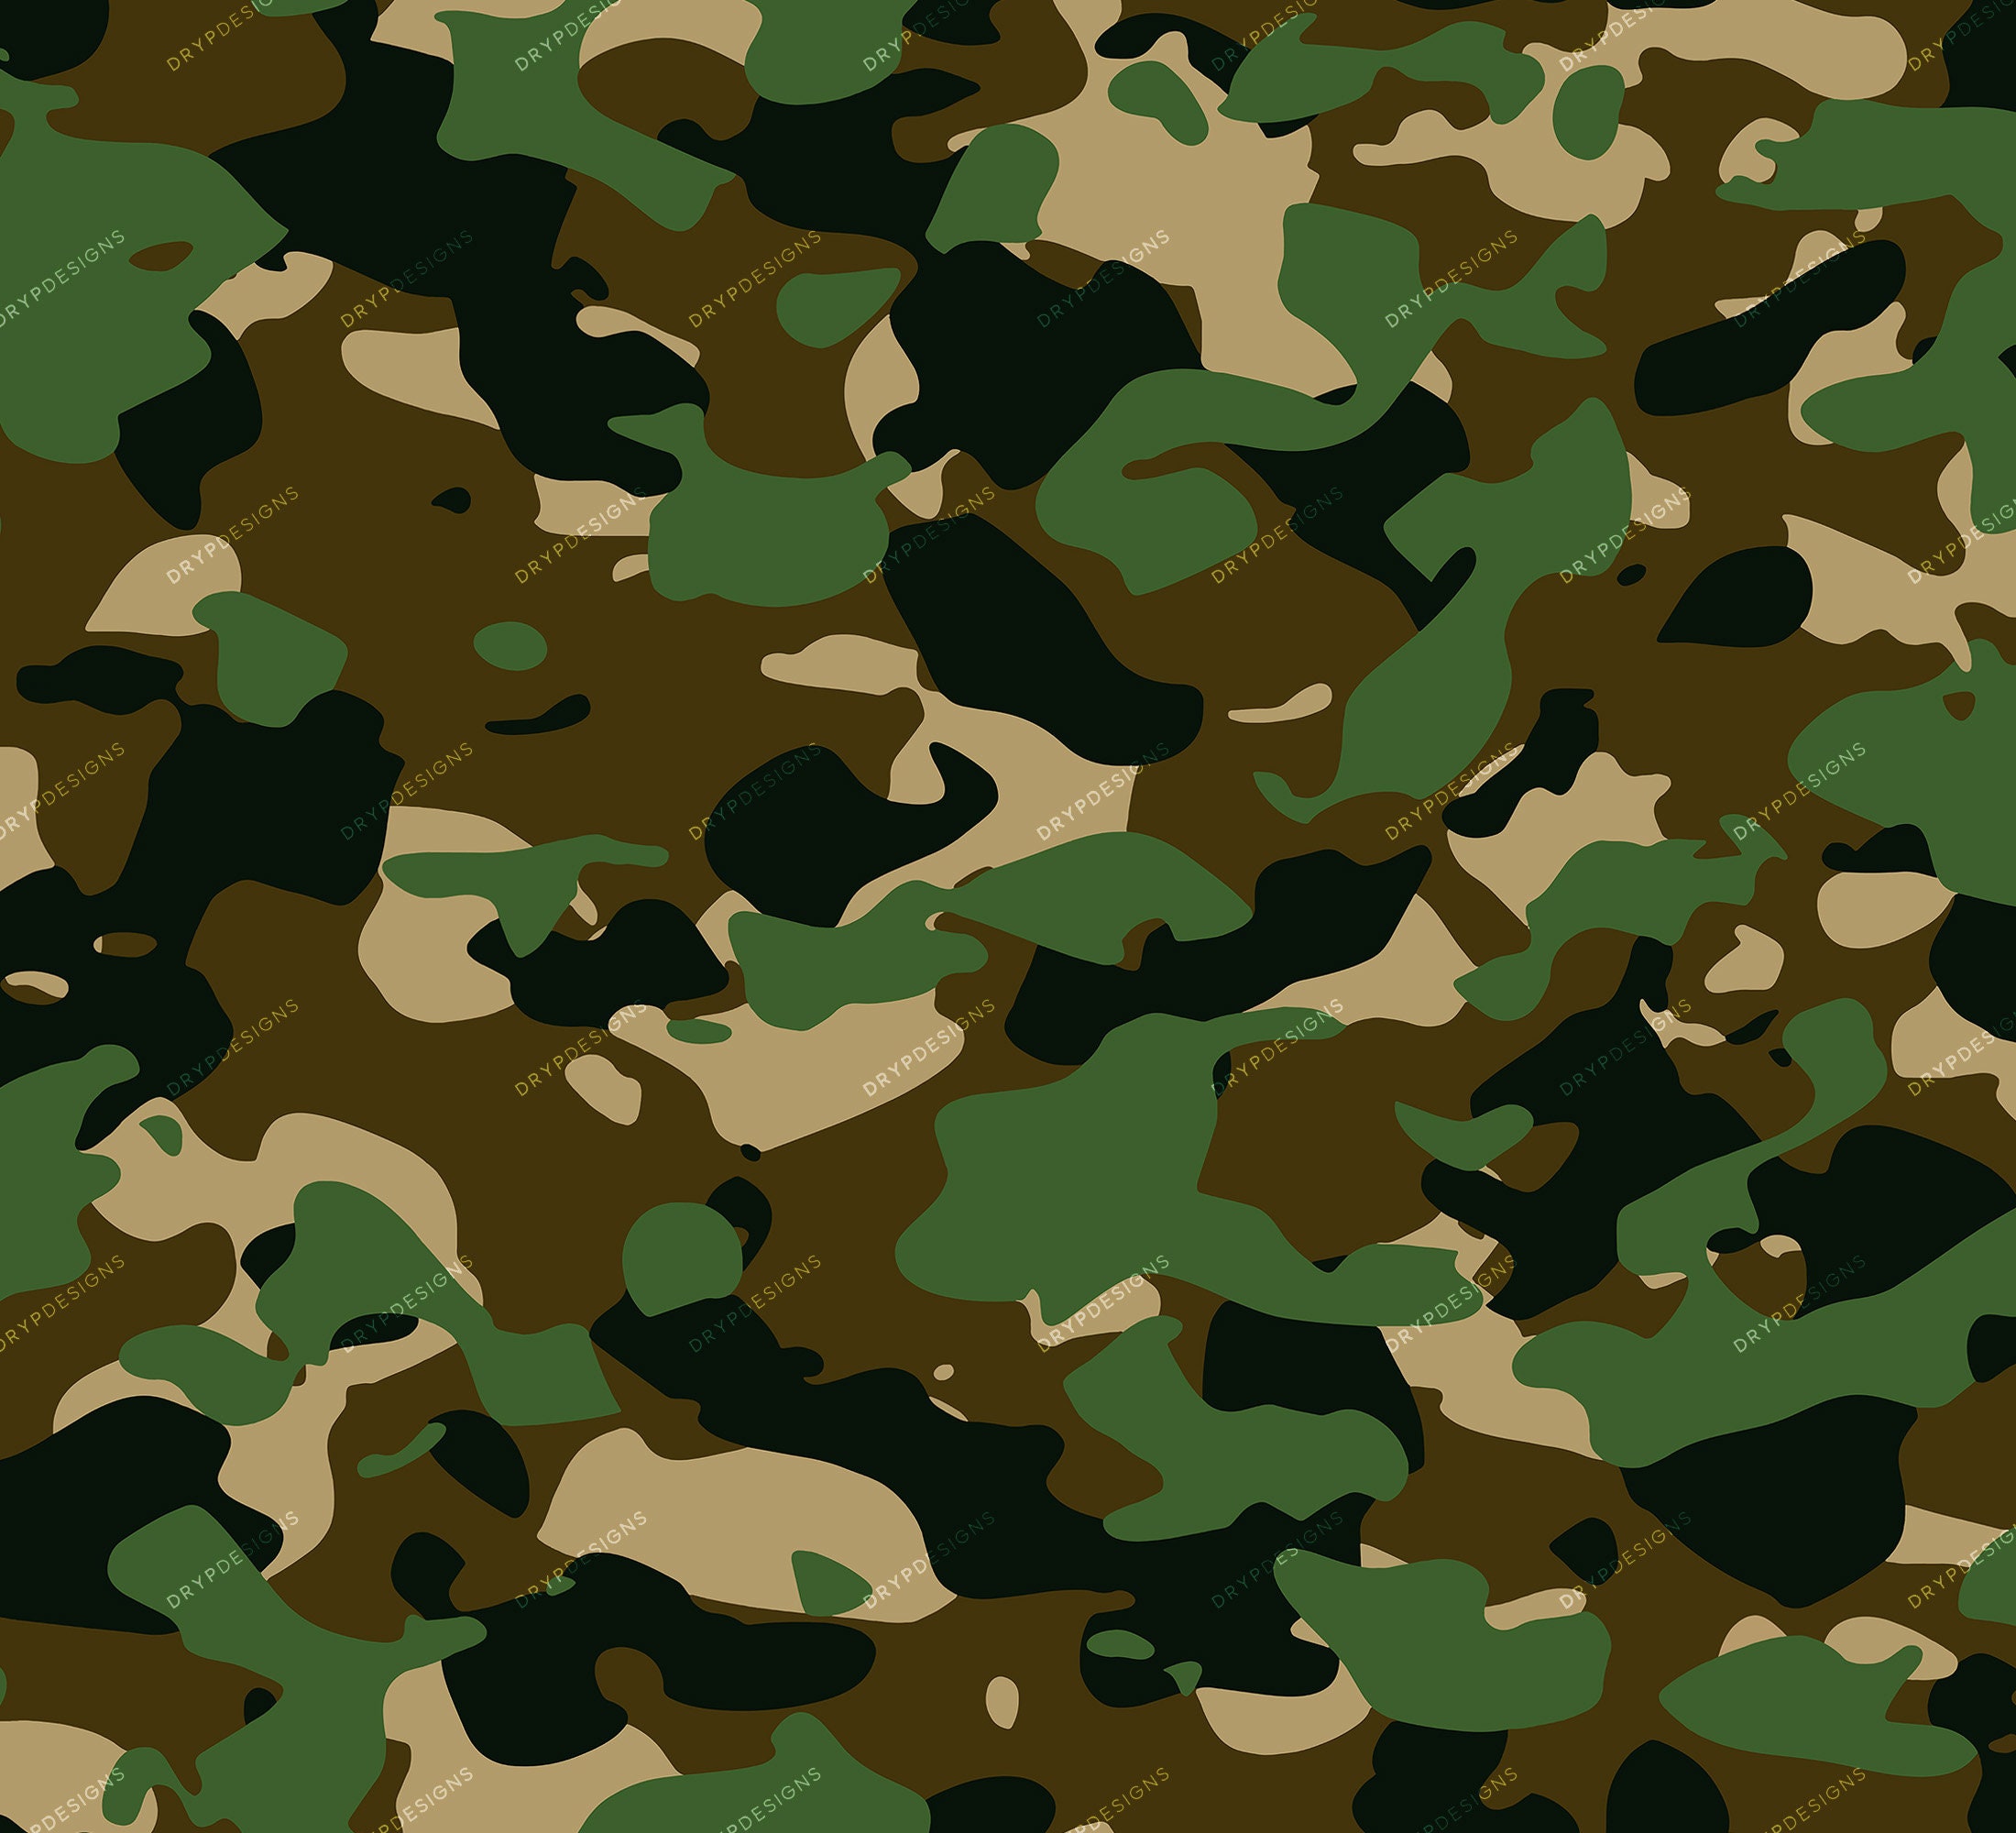 Buy Military Green Camouflage Seamless Digital Paper Background